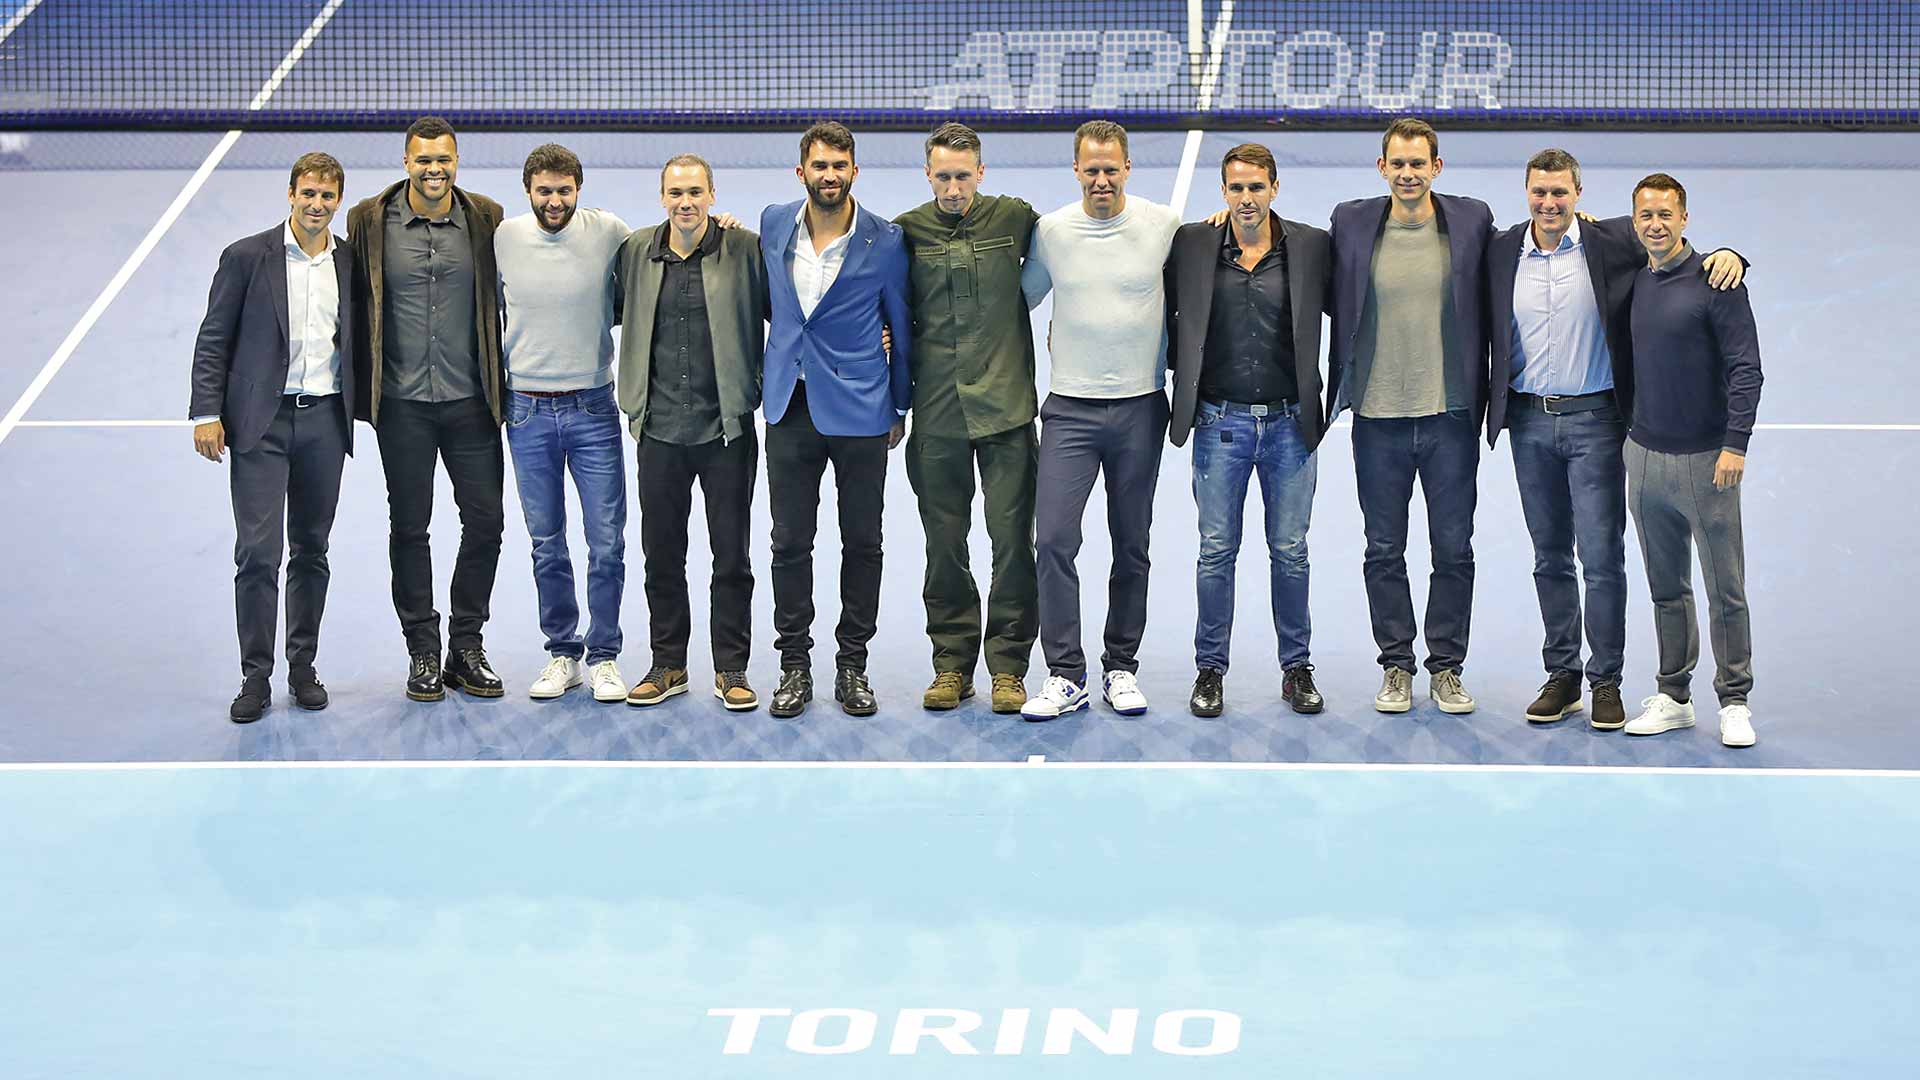 Eleven retired ATP Tour stars were honoured on Friday at the Nitto ATP Finals in Turin.